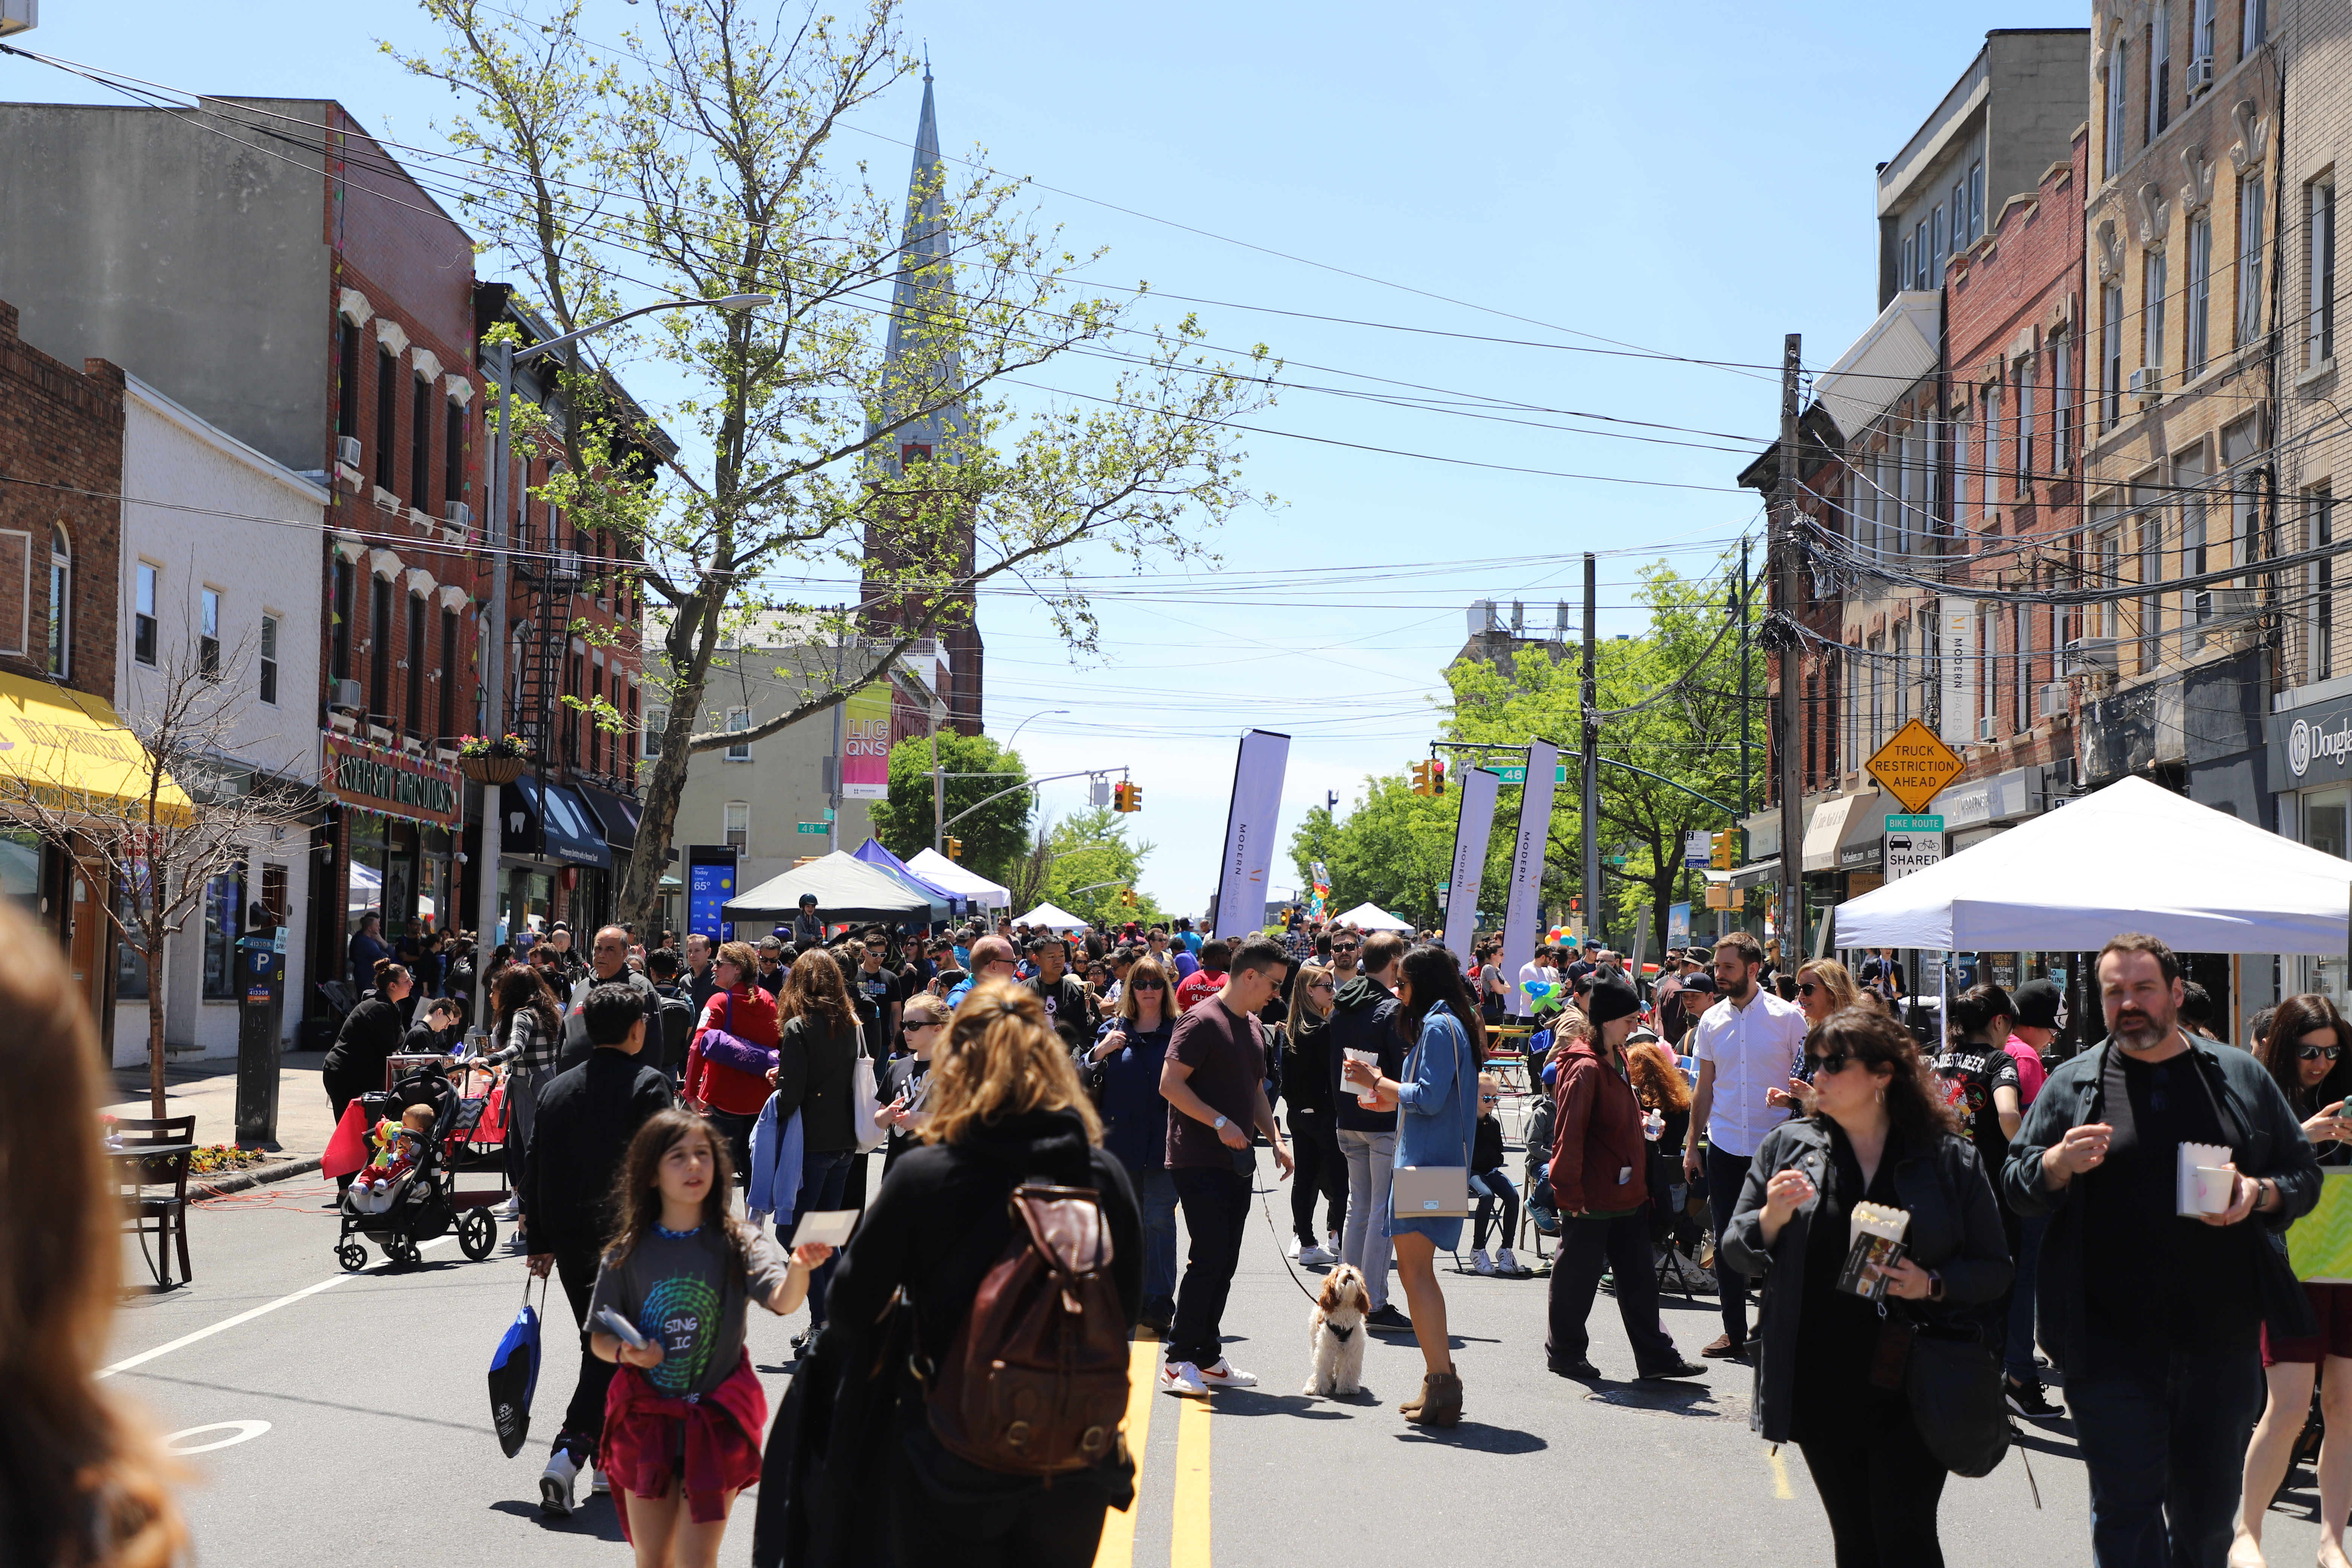 People gathered and tents set up for a Vernon Boulevard Weekend Walk in 2019.